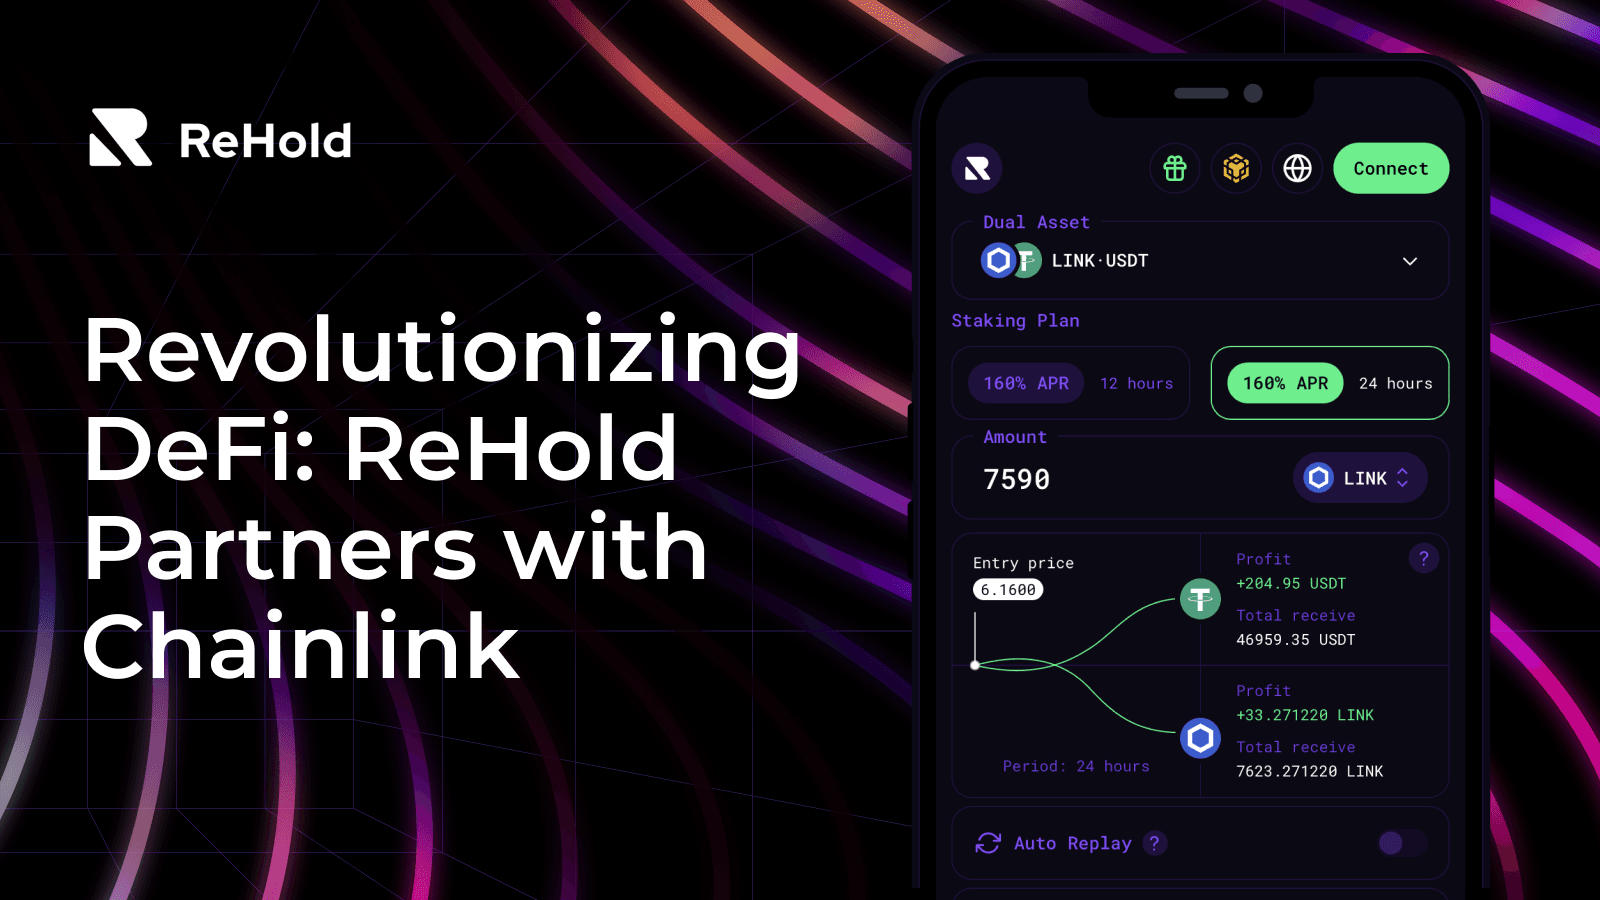 ReHold Partners with Chainlink to Revolutionize Decentralized Finance